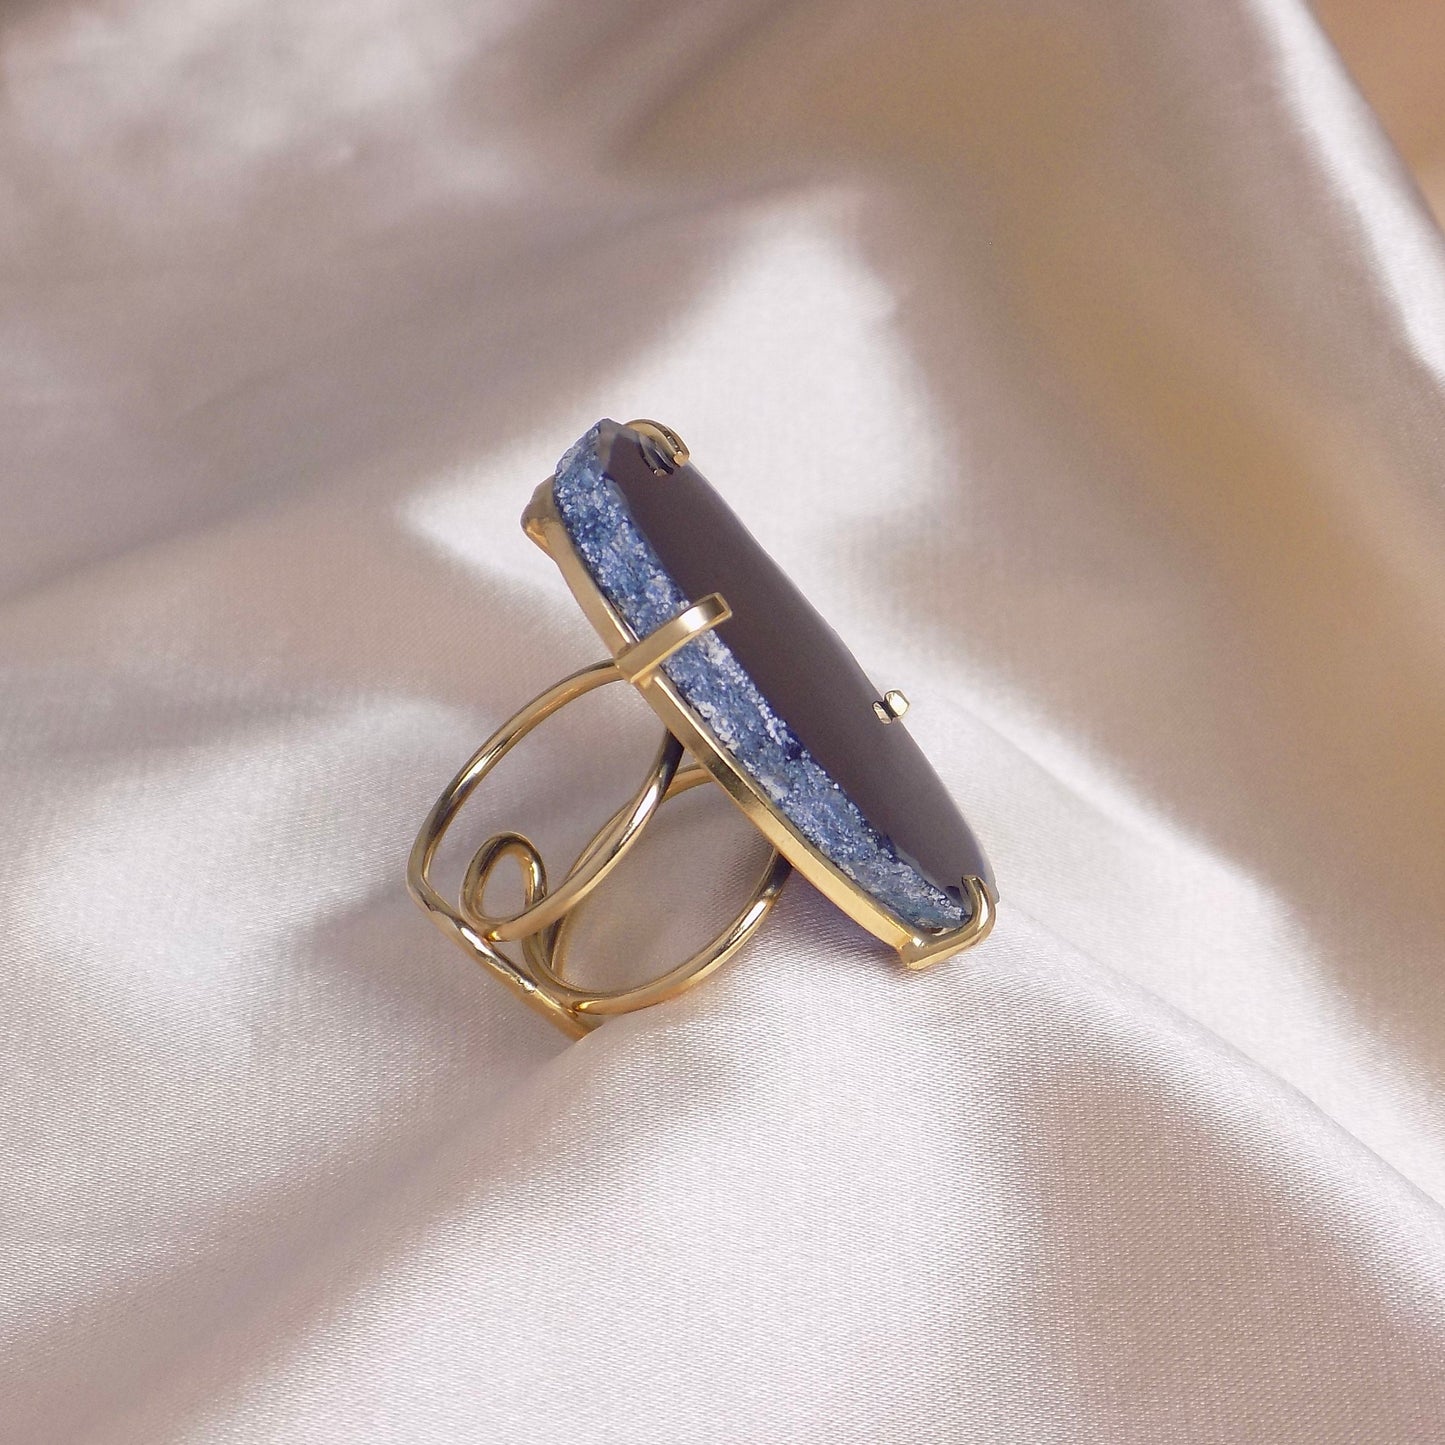 Extra Large Navy Blue Agate Gemstone Ring Gold Plated Adjustable Band, G14-770